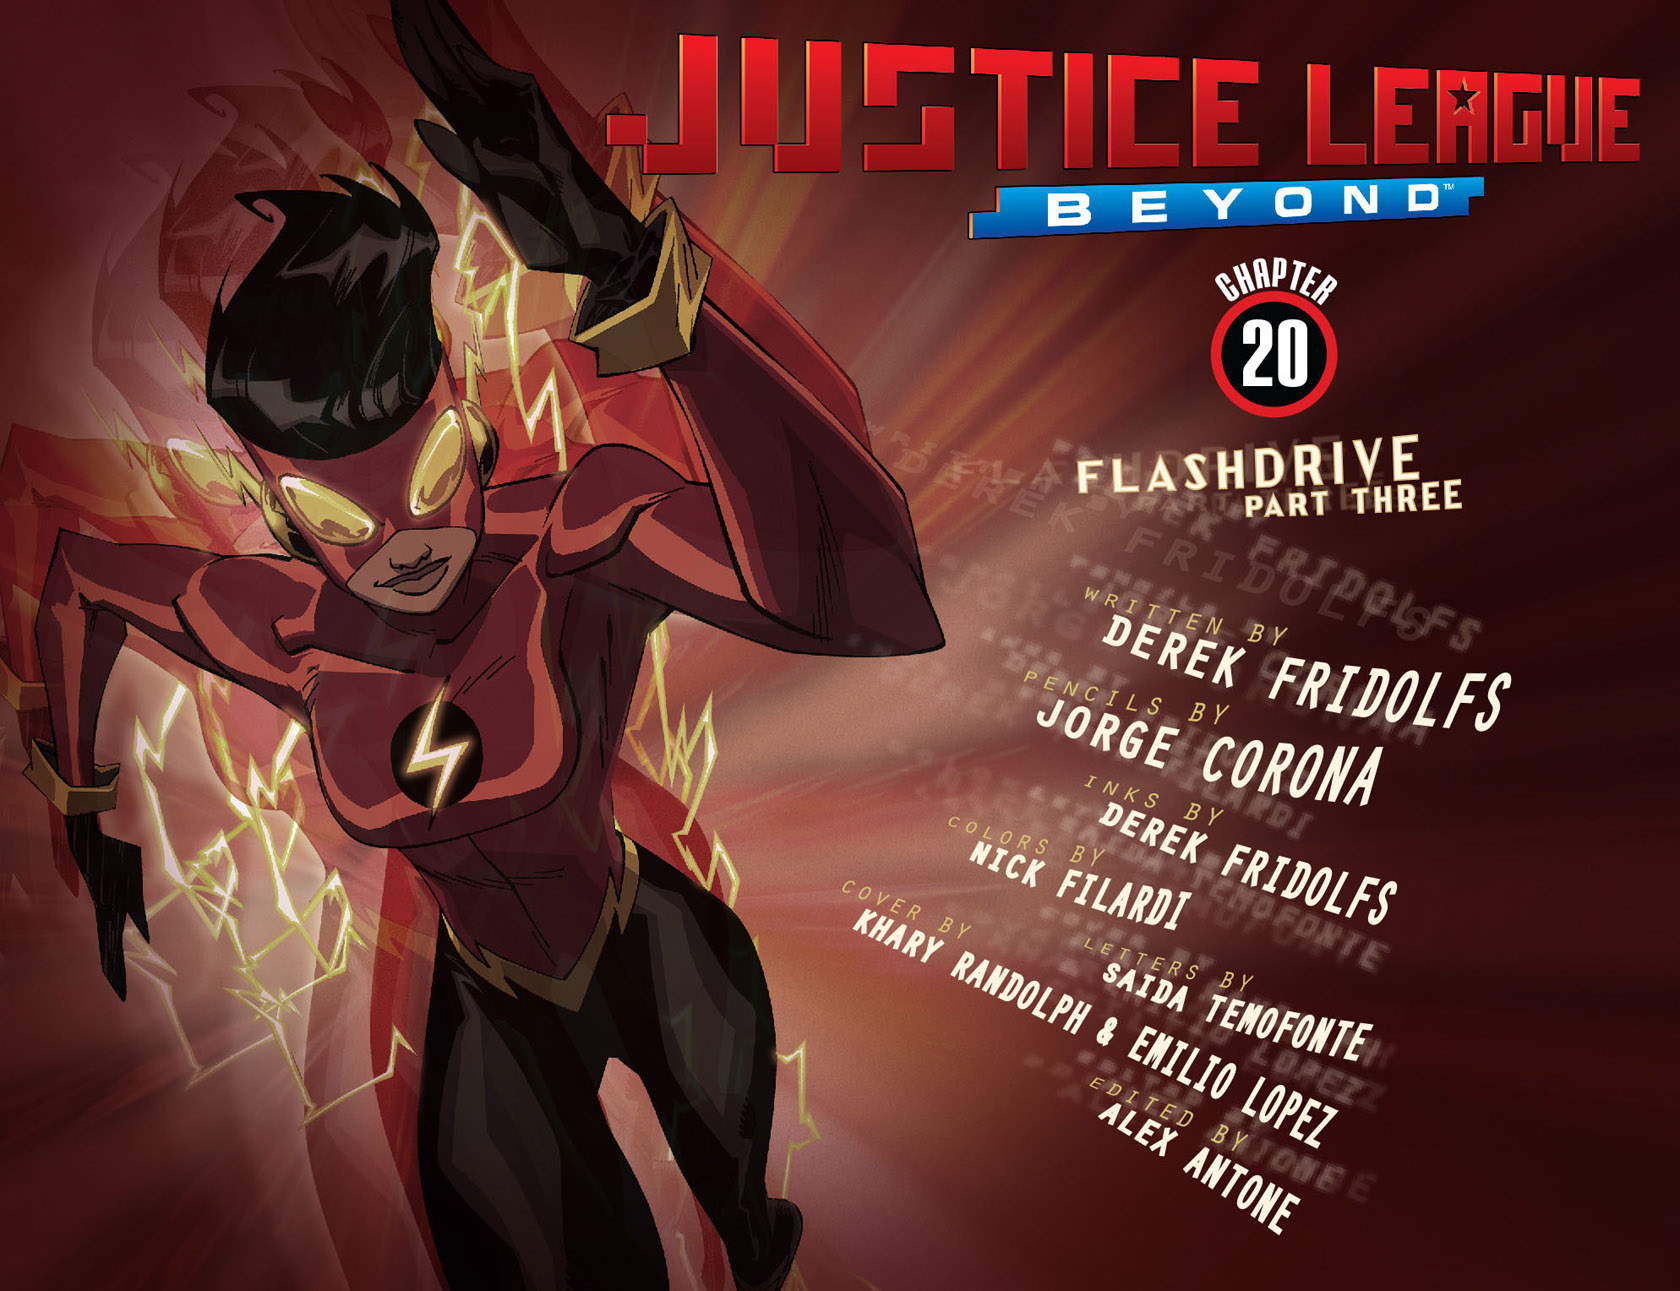 Read online Justice League Beyond comic -  Issue #20 - 2